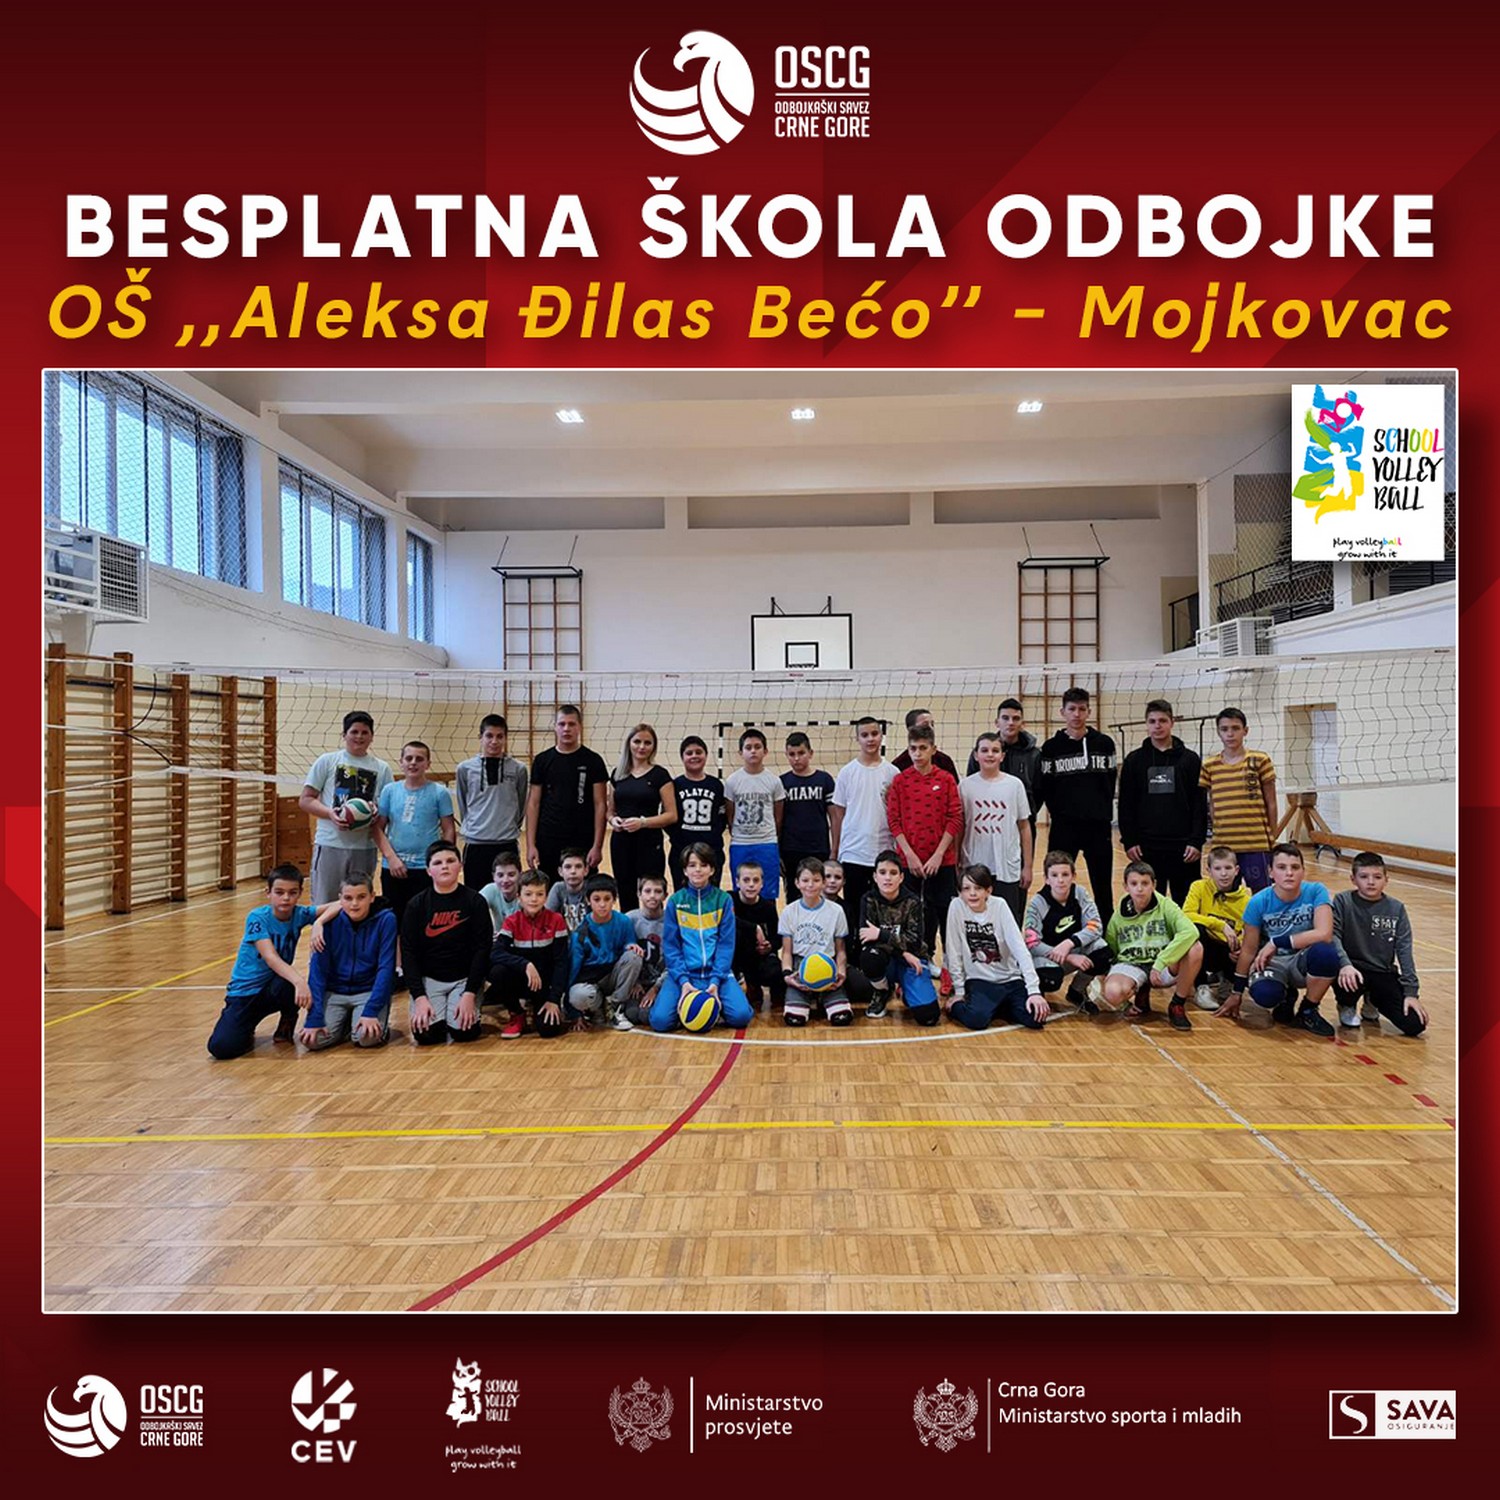 Montenegrin Volleyball family takes loads of positives after completing “Free Volleyball School” first year